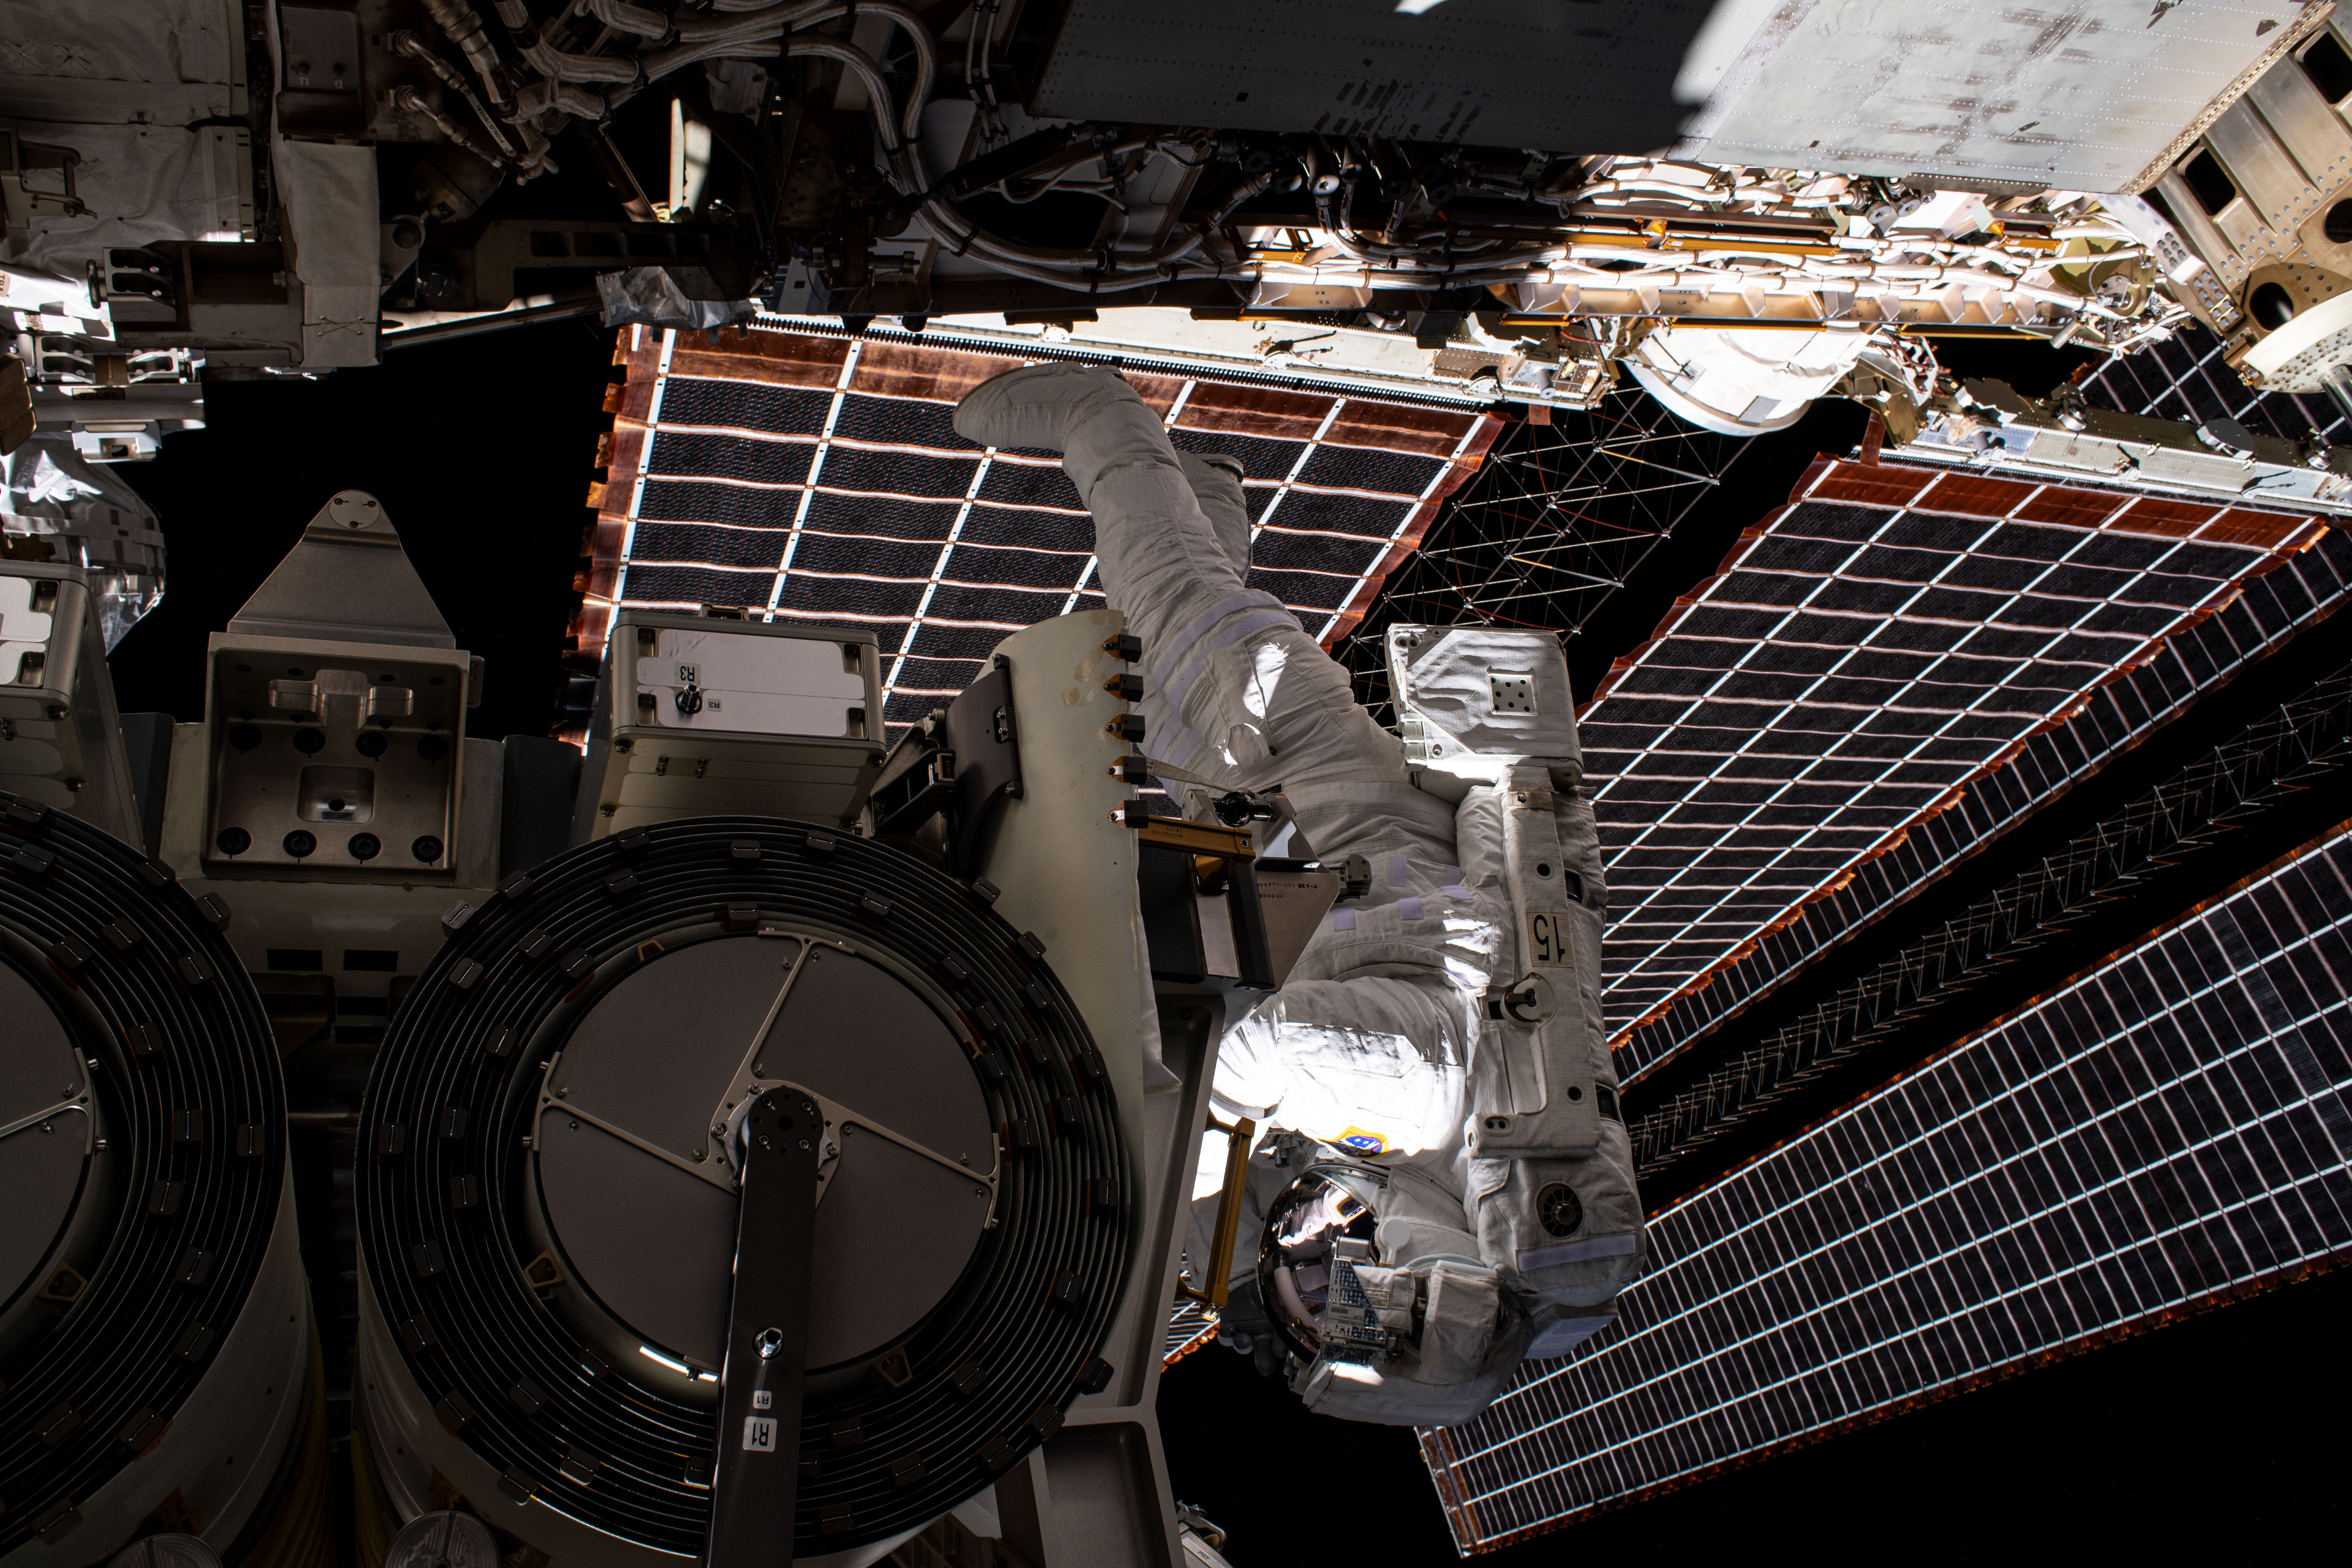 Shane Kimbrough Helps Install Solar Array on Space Station